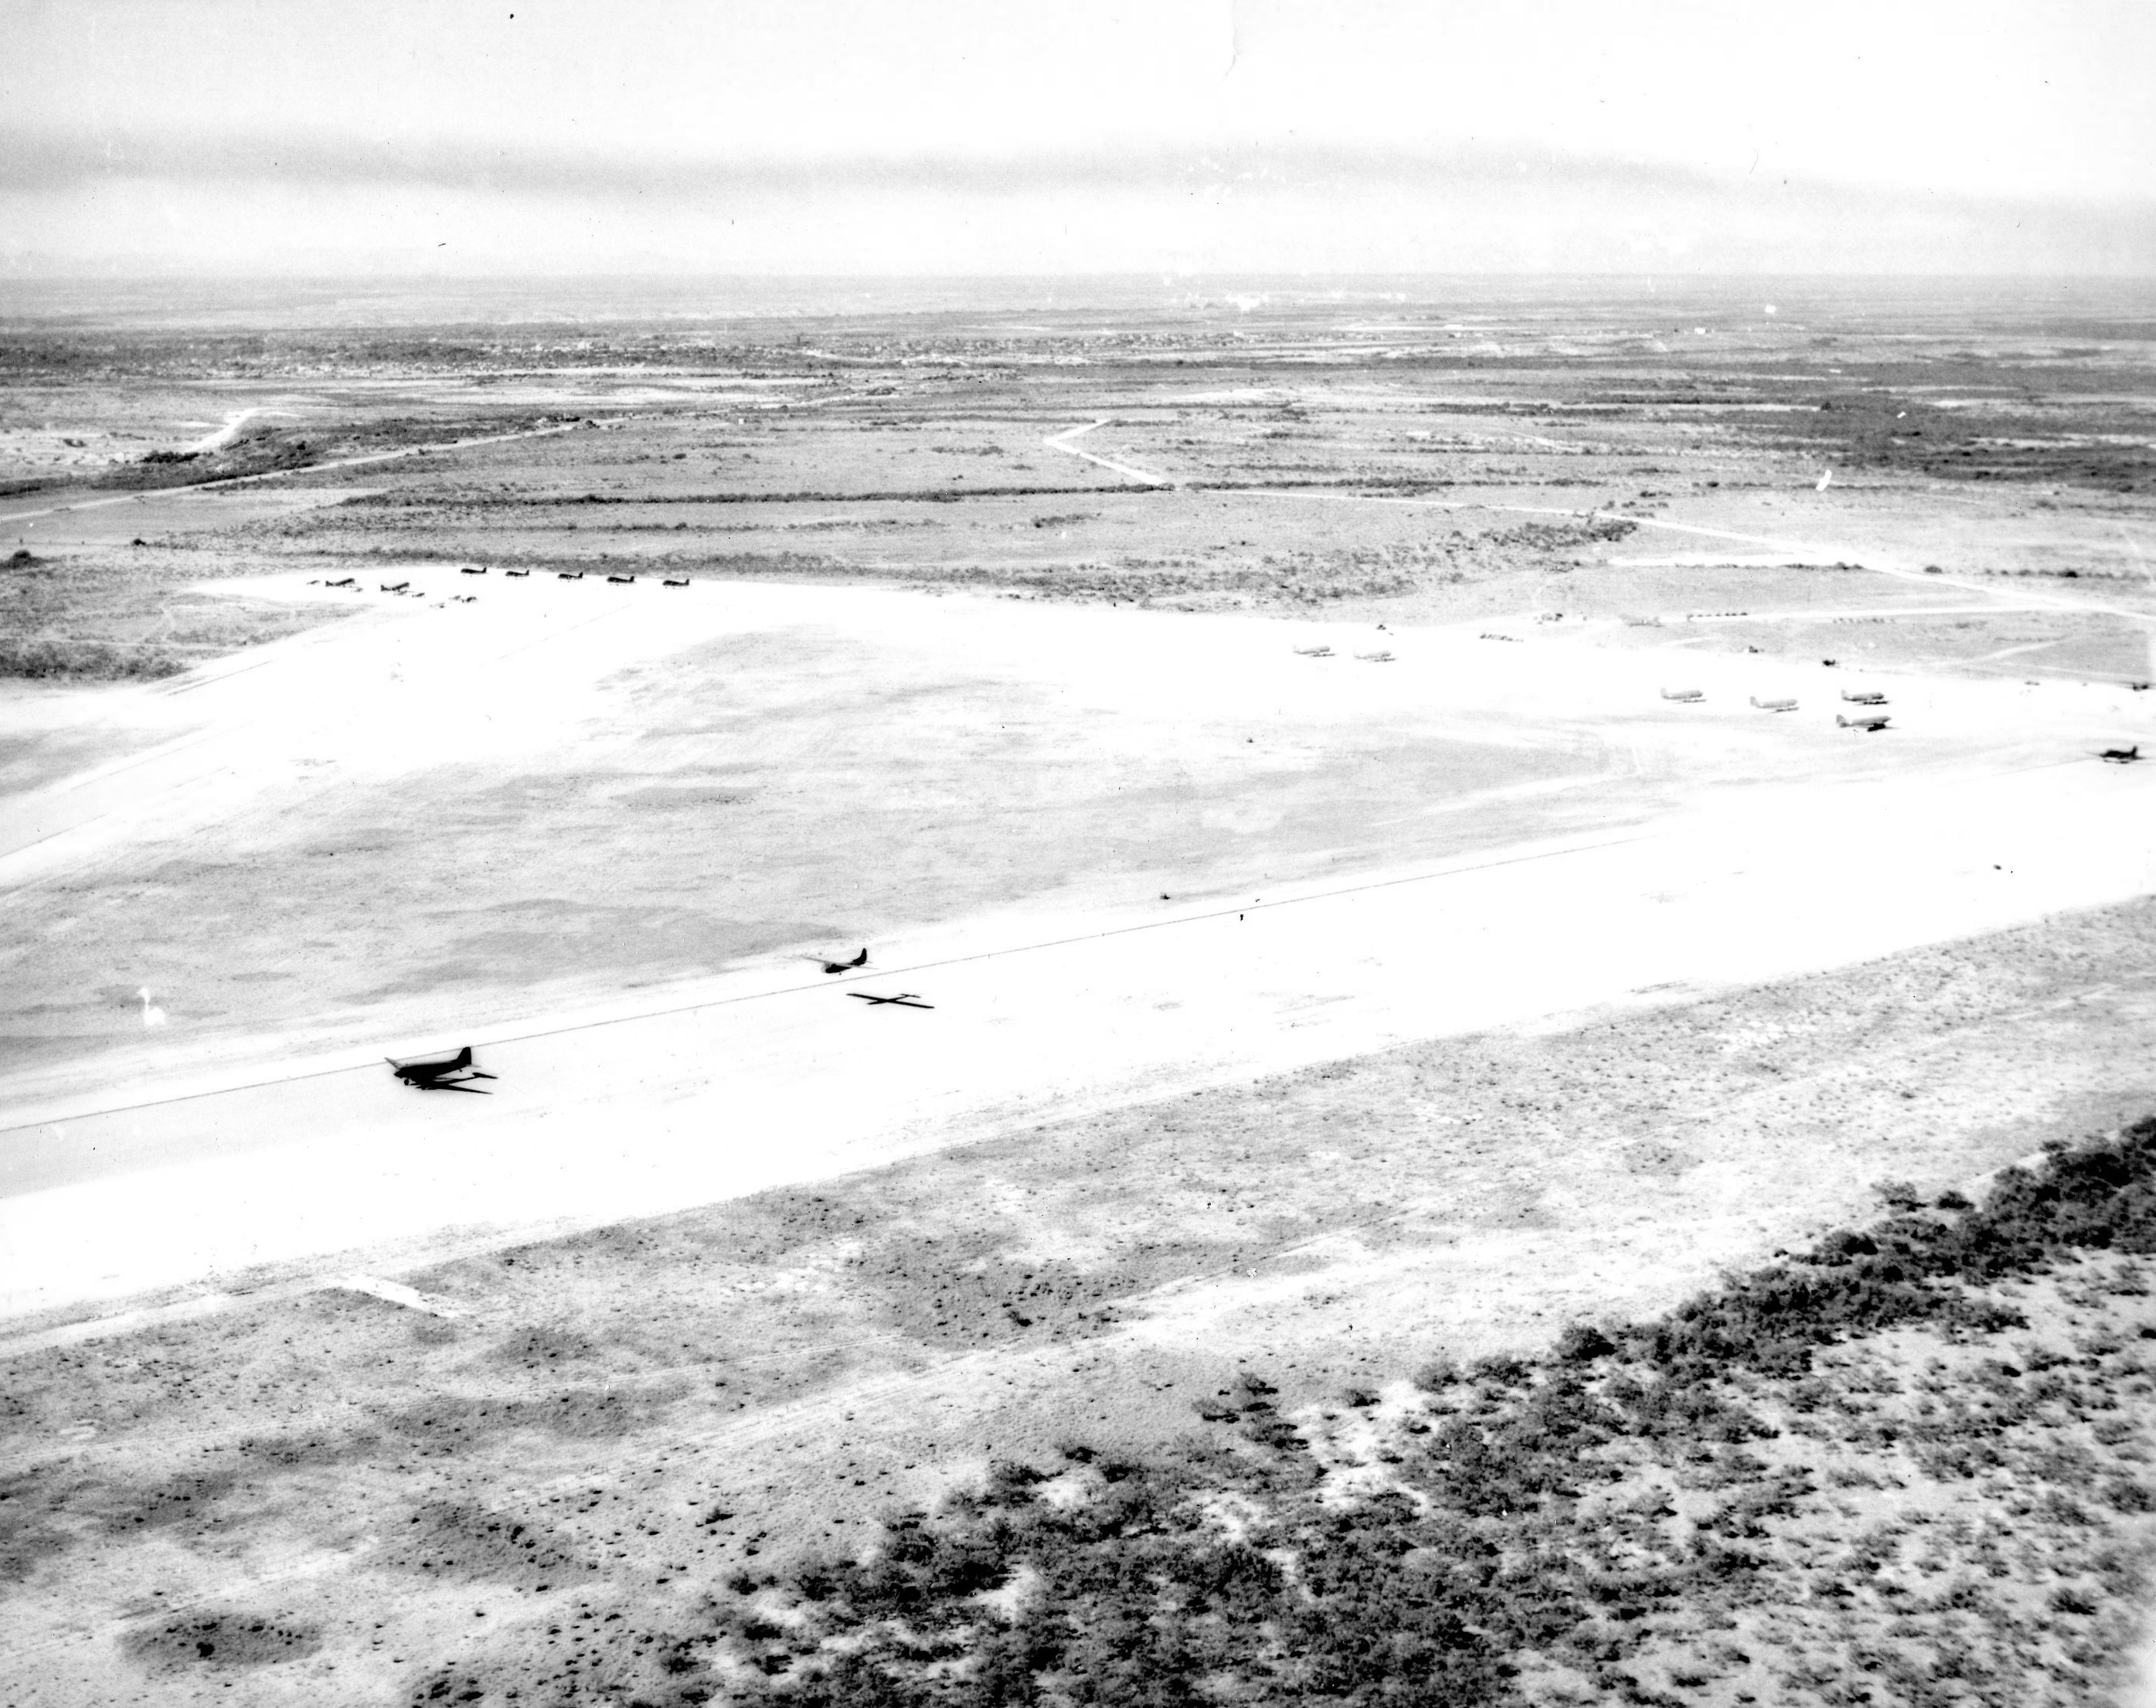 Aerial view of a glider training airstrip in Texas, 1943. Visible are C-47 Skytrain tow planes with Waco CG-4A gliders. Note the CG-4A in tow taking off.